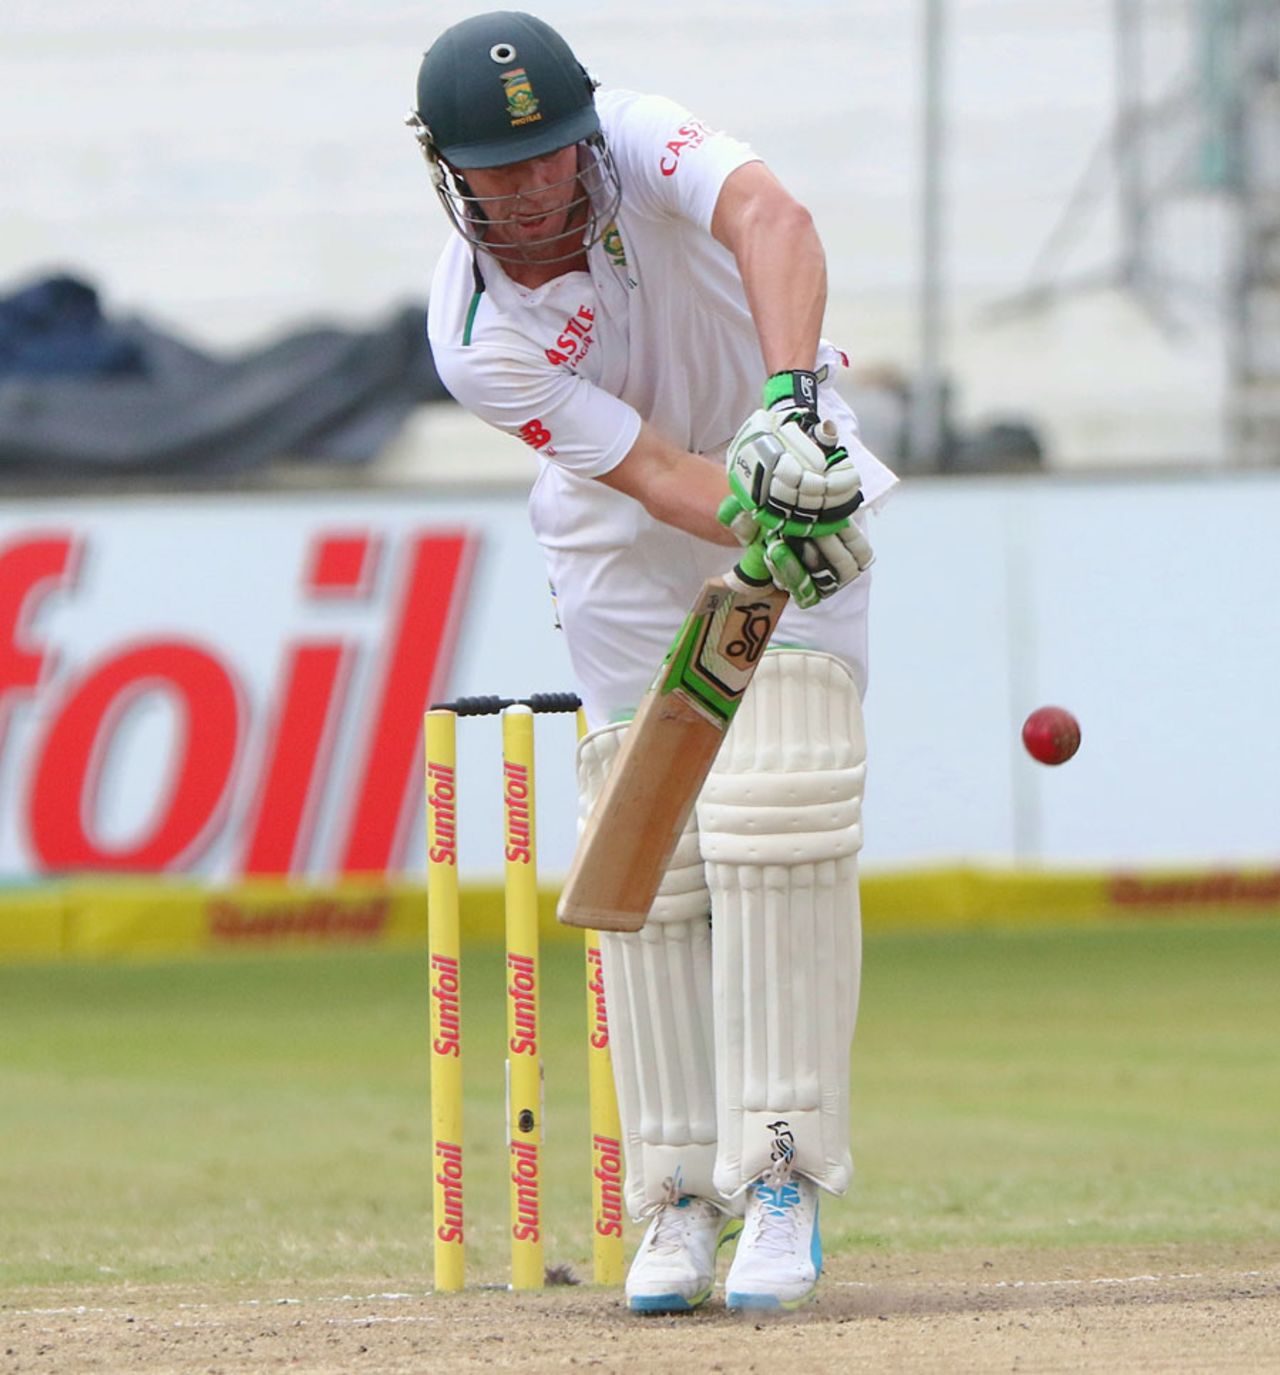 AB de Villiers set about defying England, South Africa v England, 1st Test, Durban, 4th day, December 29, 2015